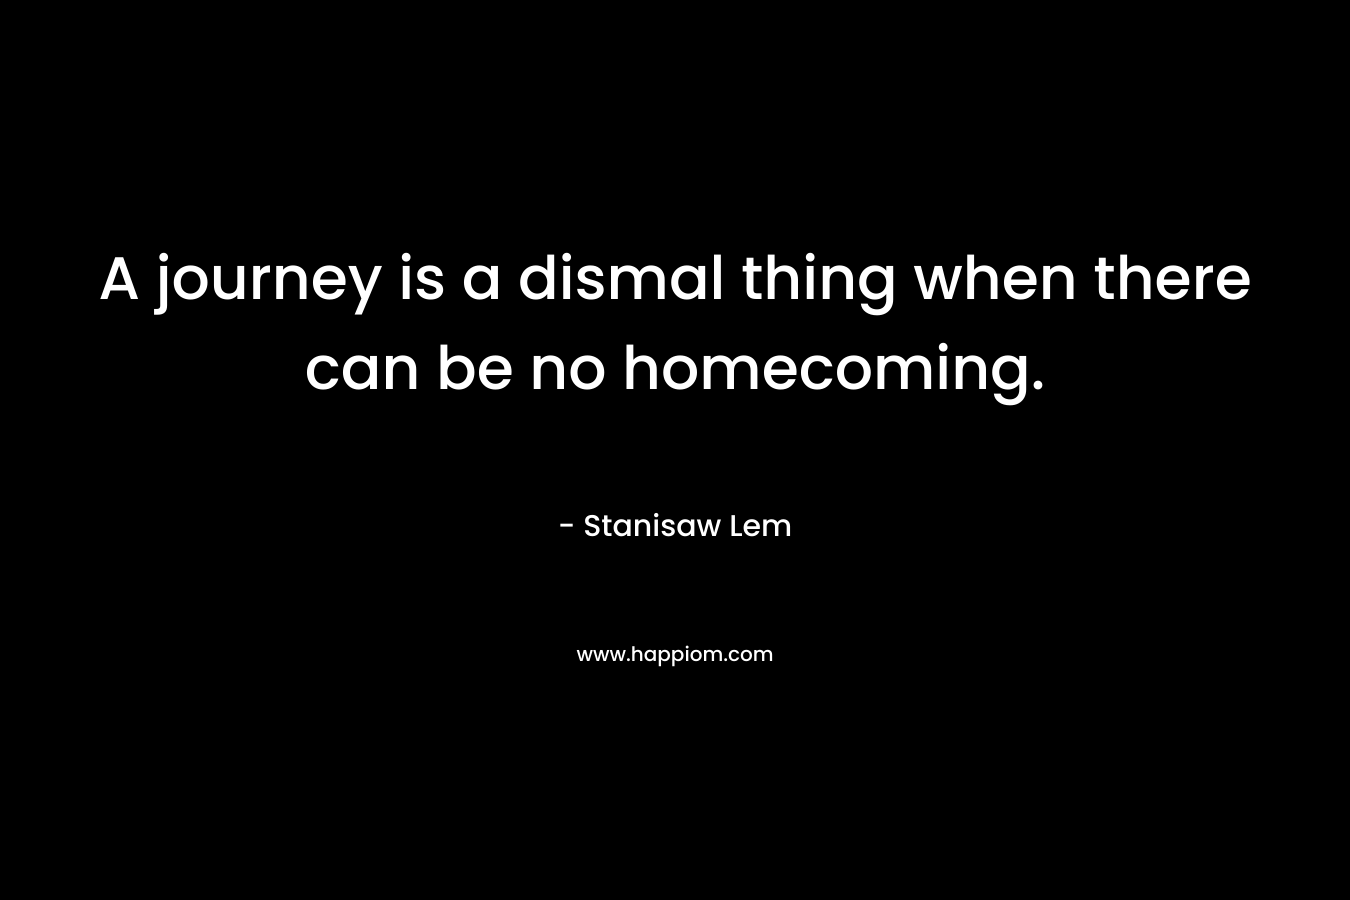 A journey is a dismal thing when there can be no homecoming.